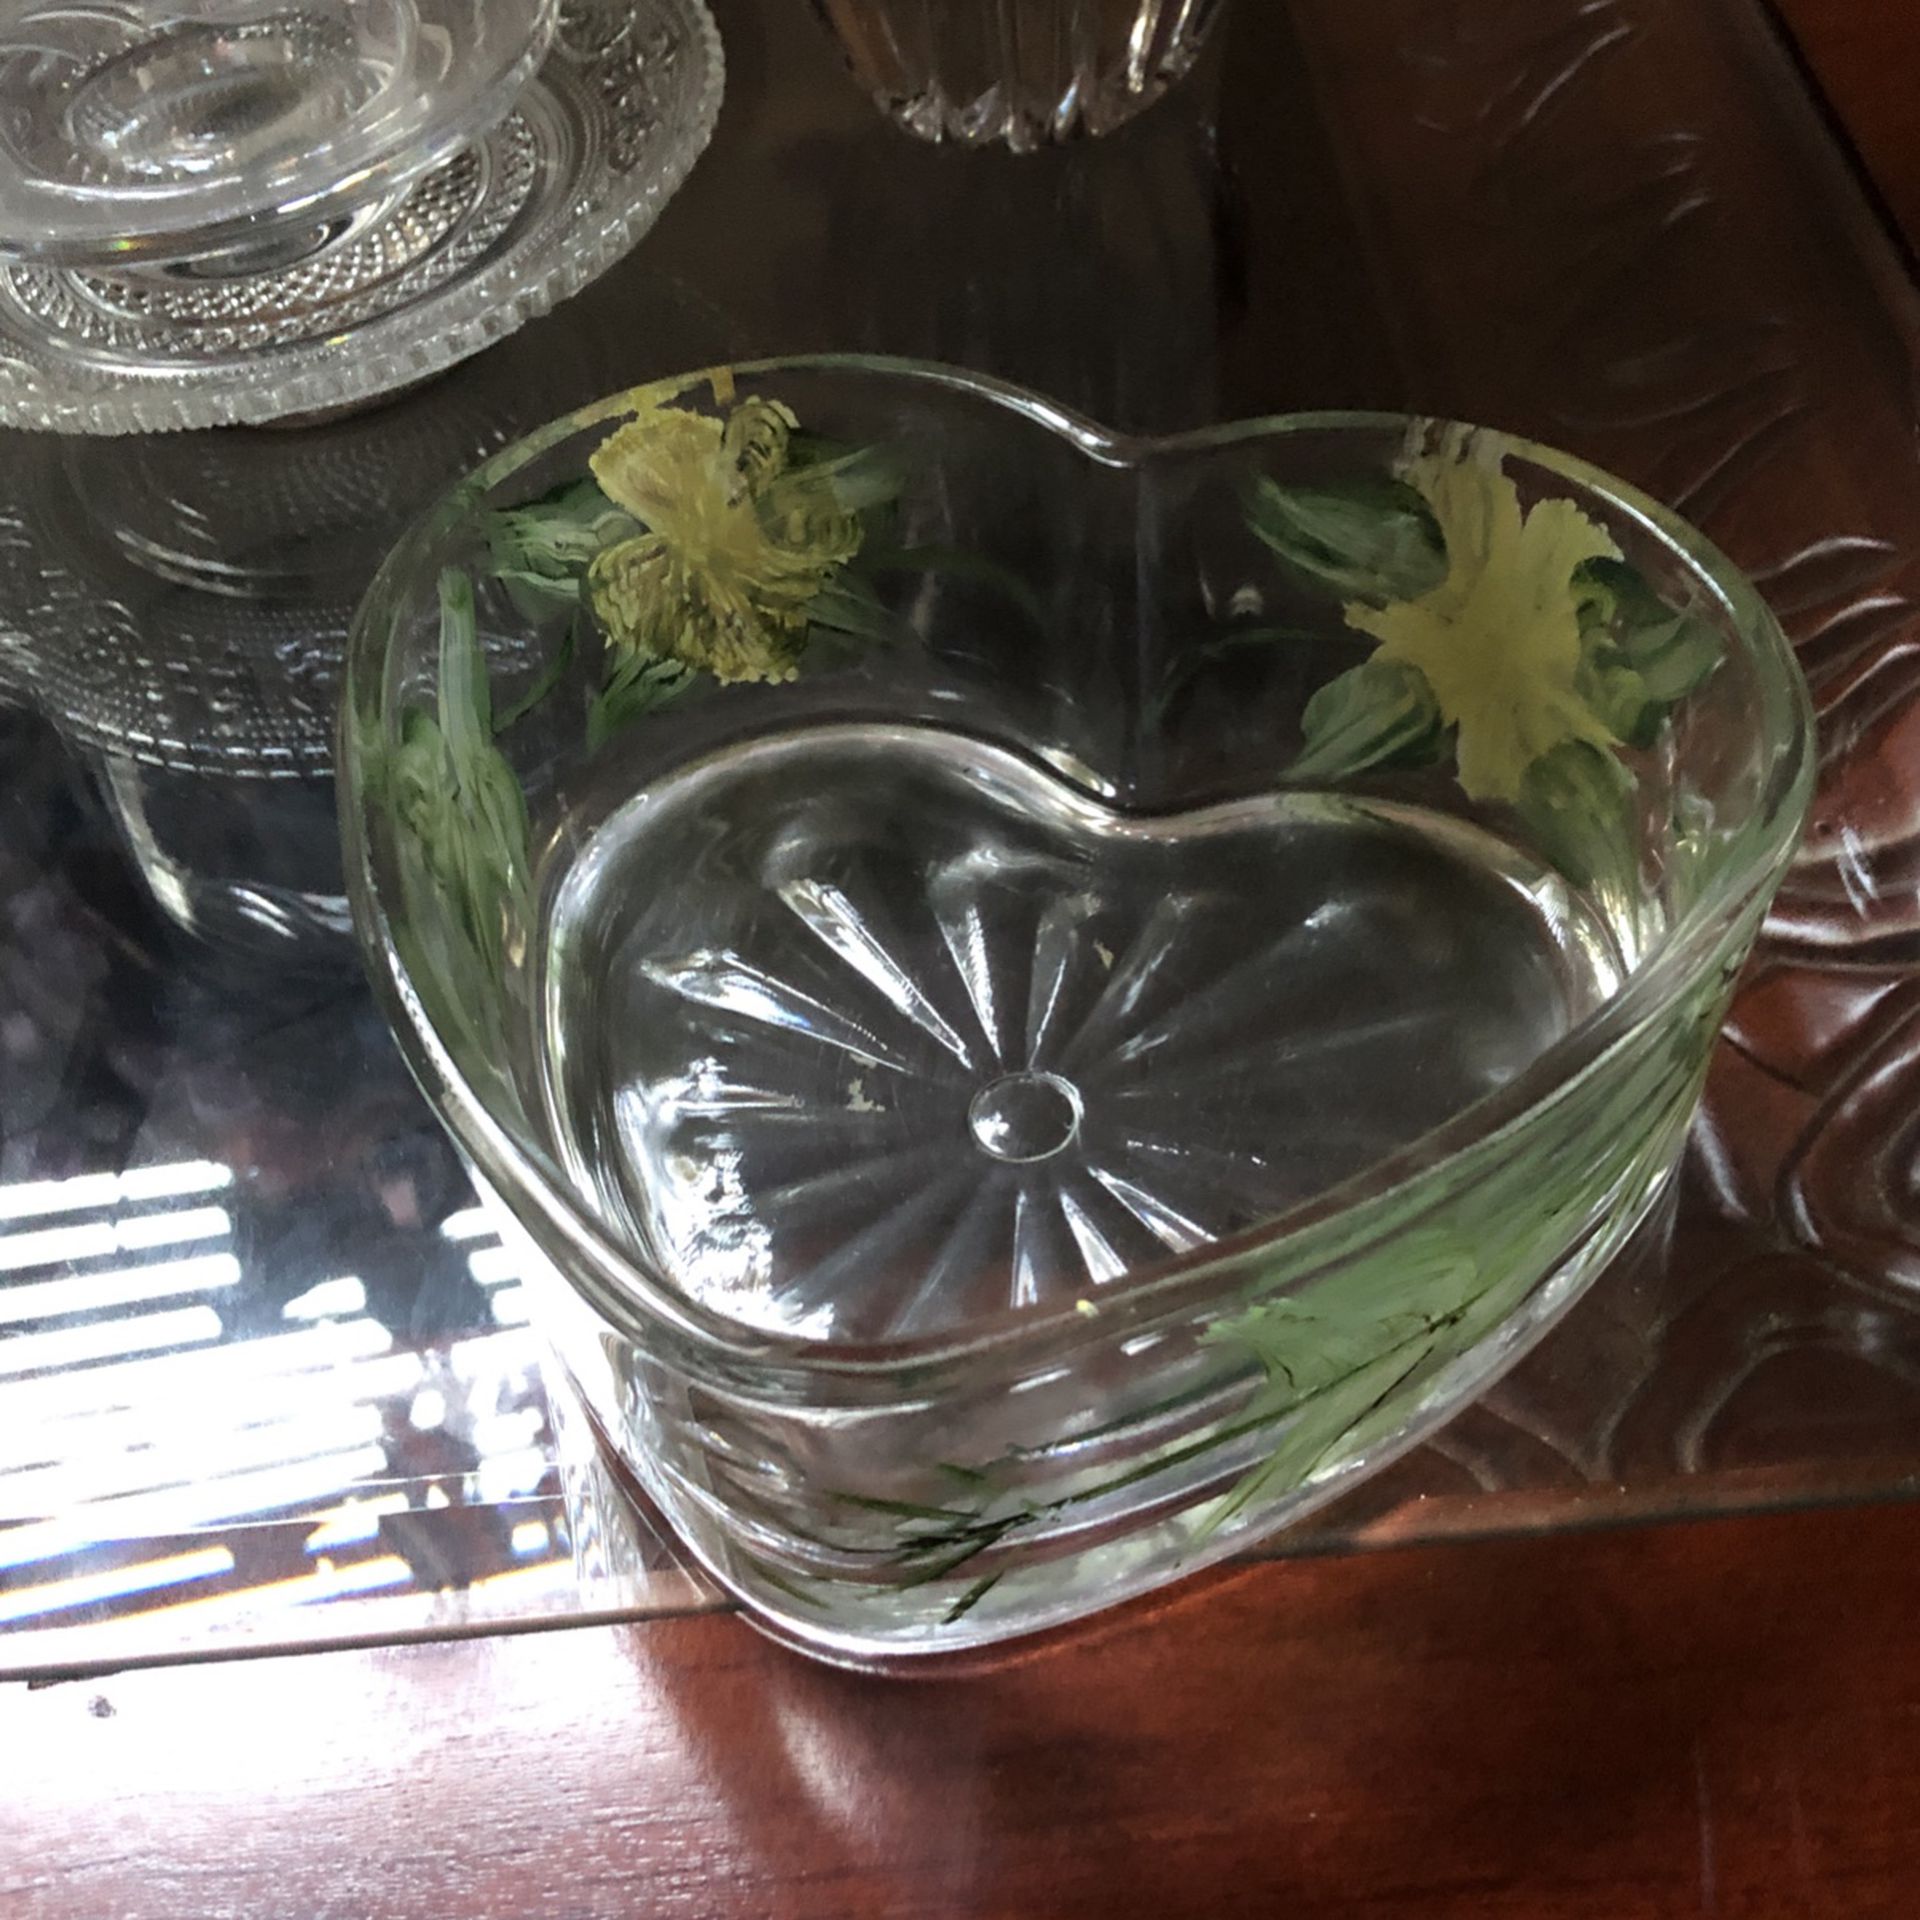 6” Glass Vase - Heart shaped 2”H X 6” W